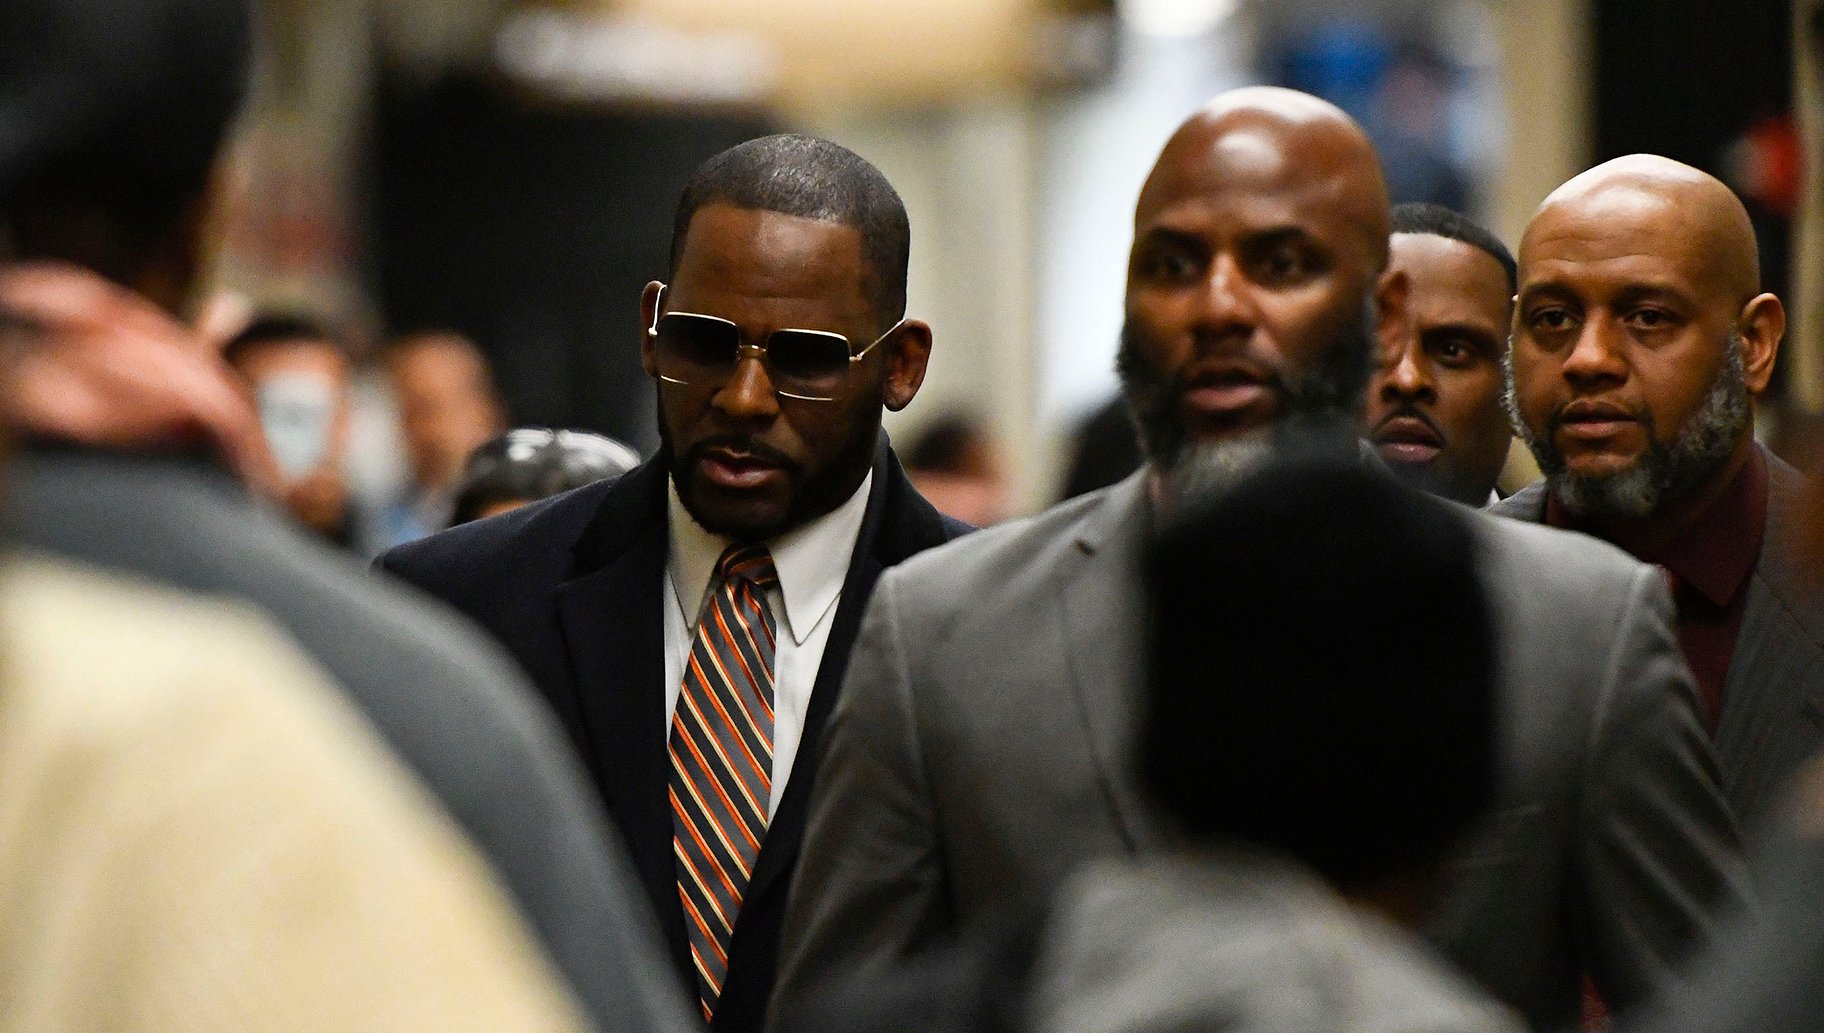 Musician R. Kelly arrives at the Daley Center for a hearing in his child support case on Wednesday, May 8, 2019. (AP Photo / Matt Marton)